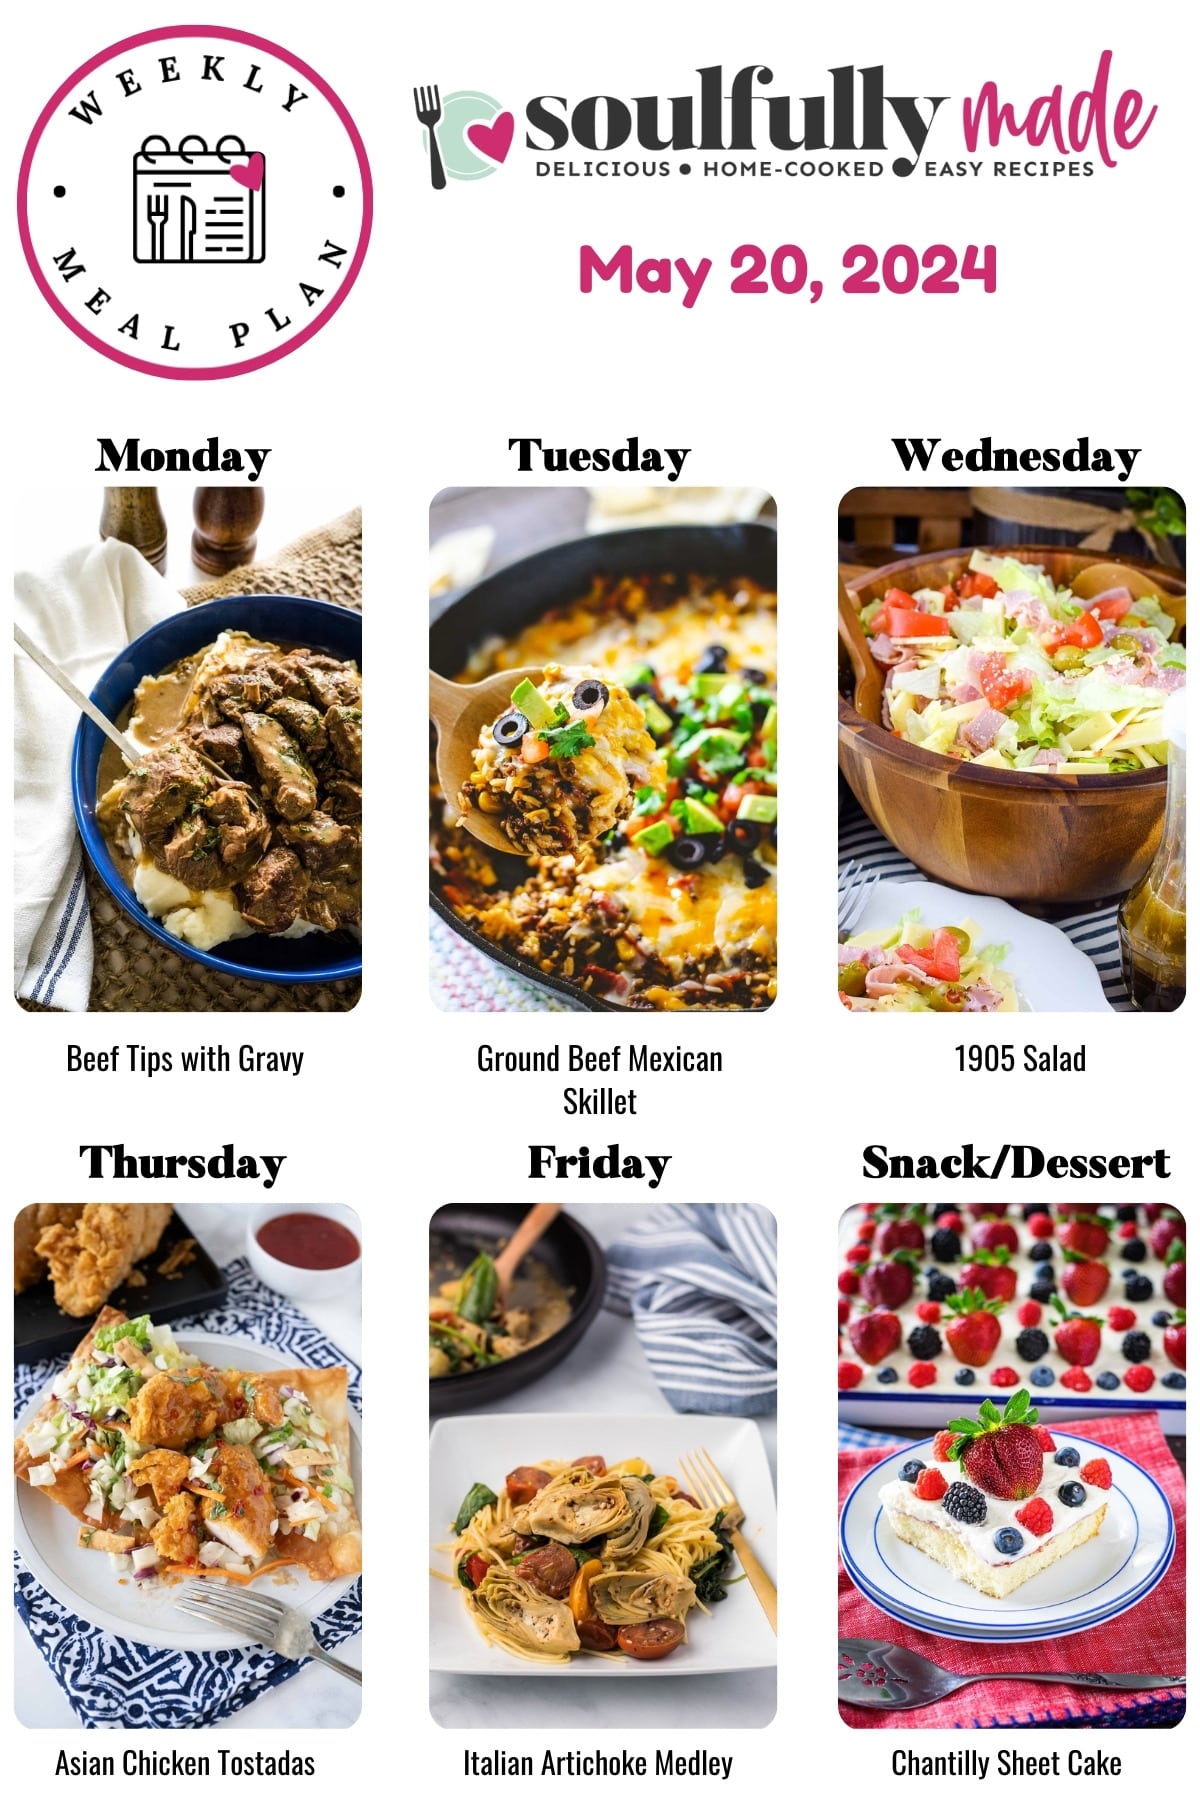 Weekly meal plan for May 20, 2024 including Beef tips with gravy, ground beef Mexican skillet, 1905 salad, Asian chicken tostadas, Italian artichoke medley, and a red, white, and blue Chantilly cake for dessert.